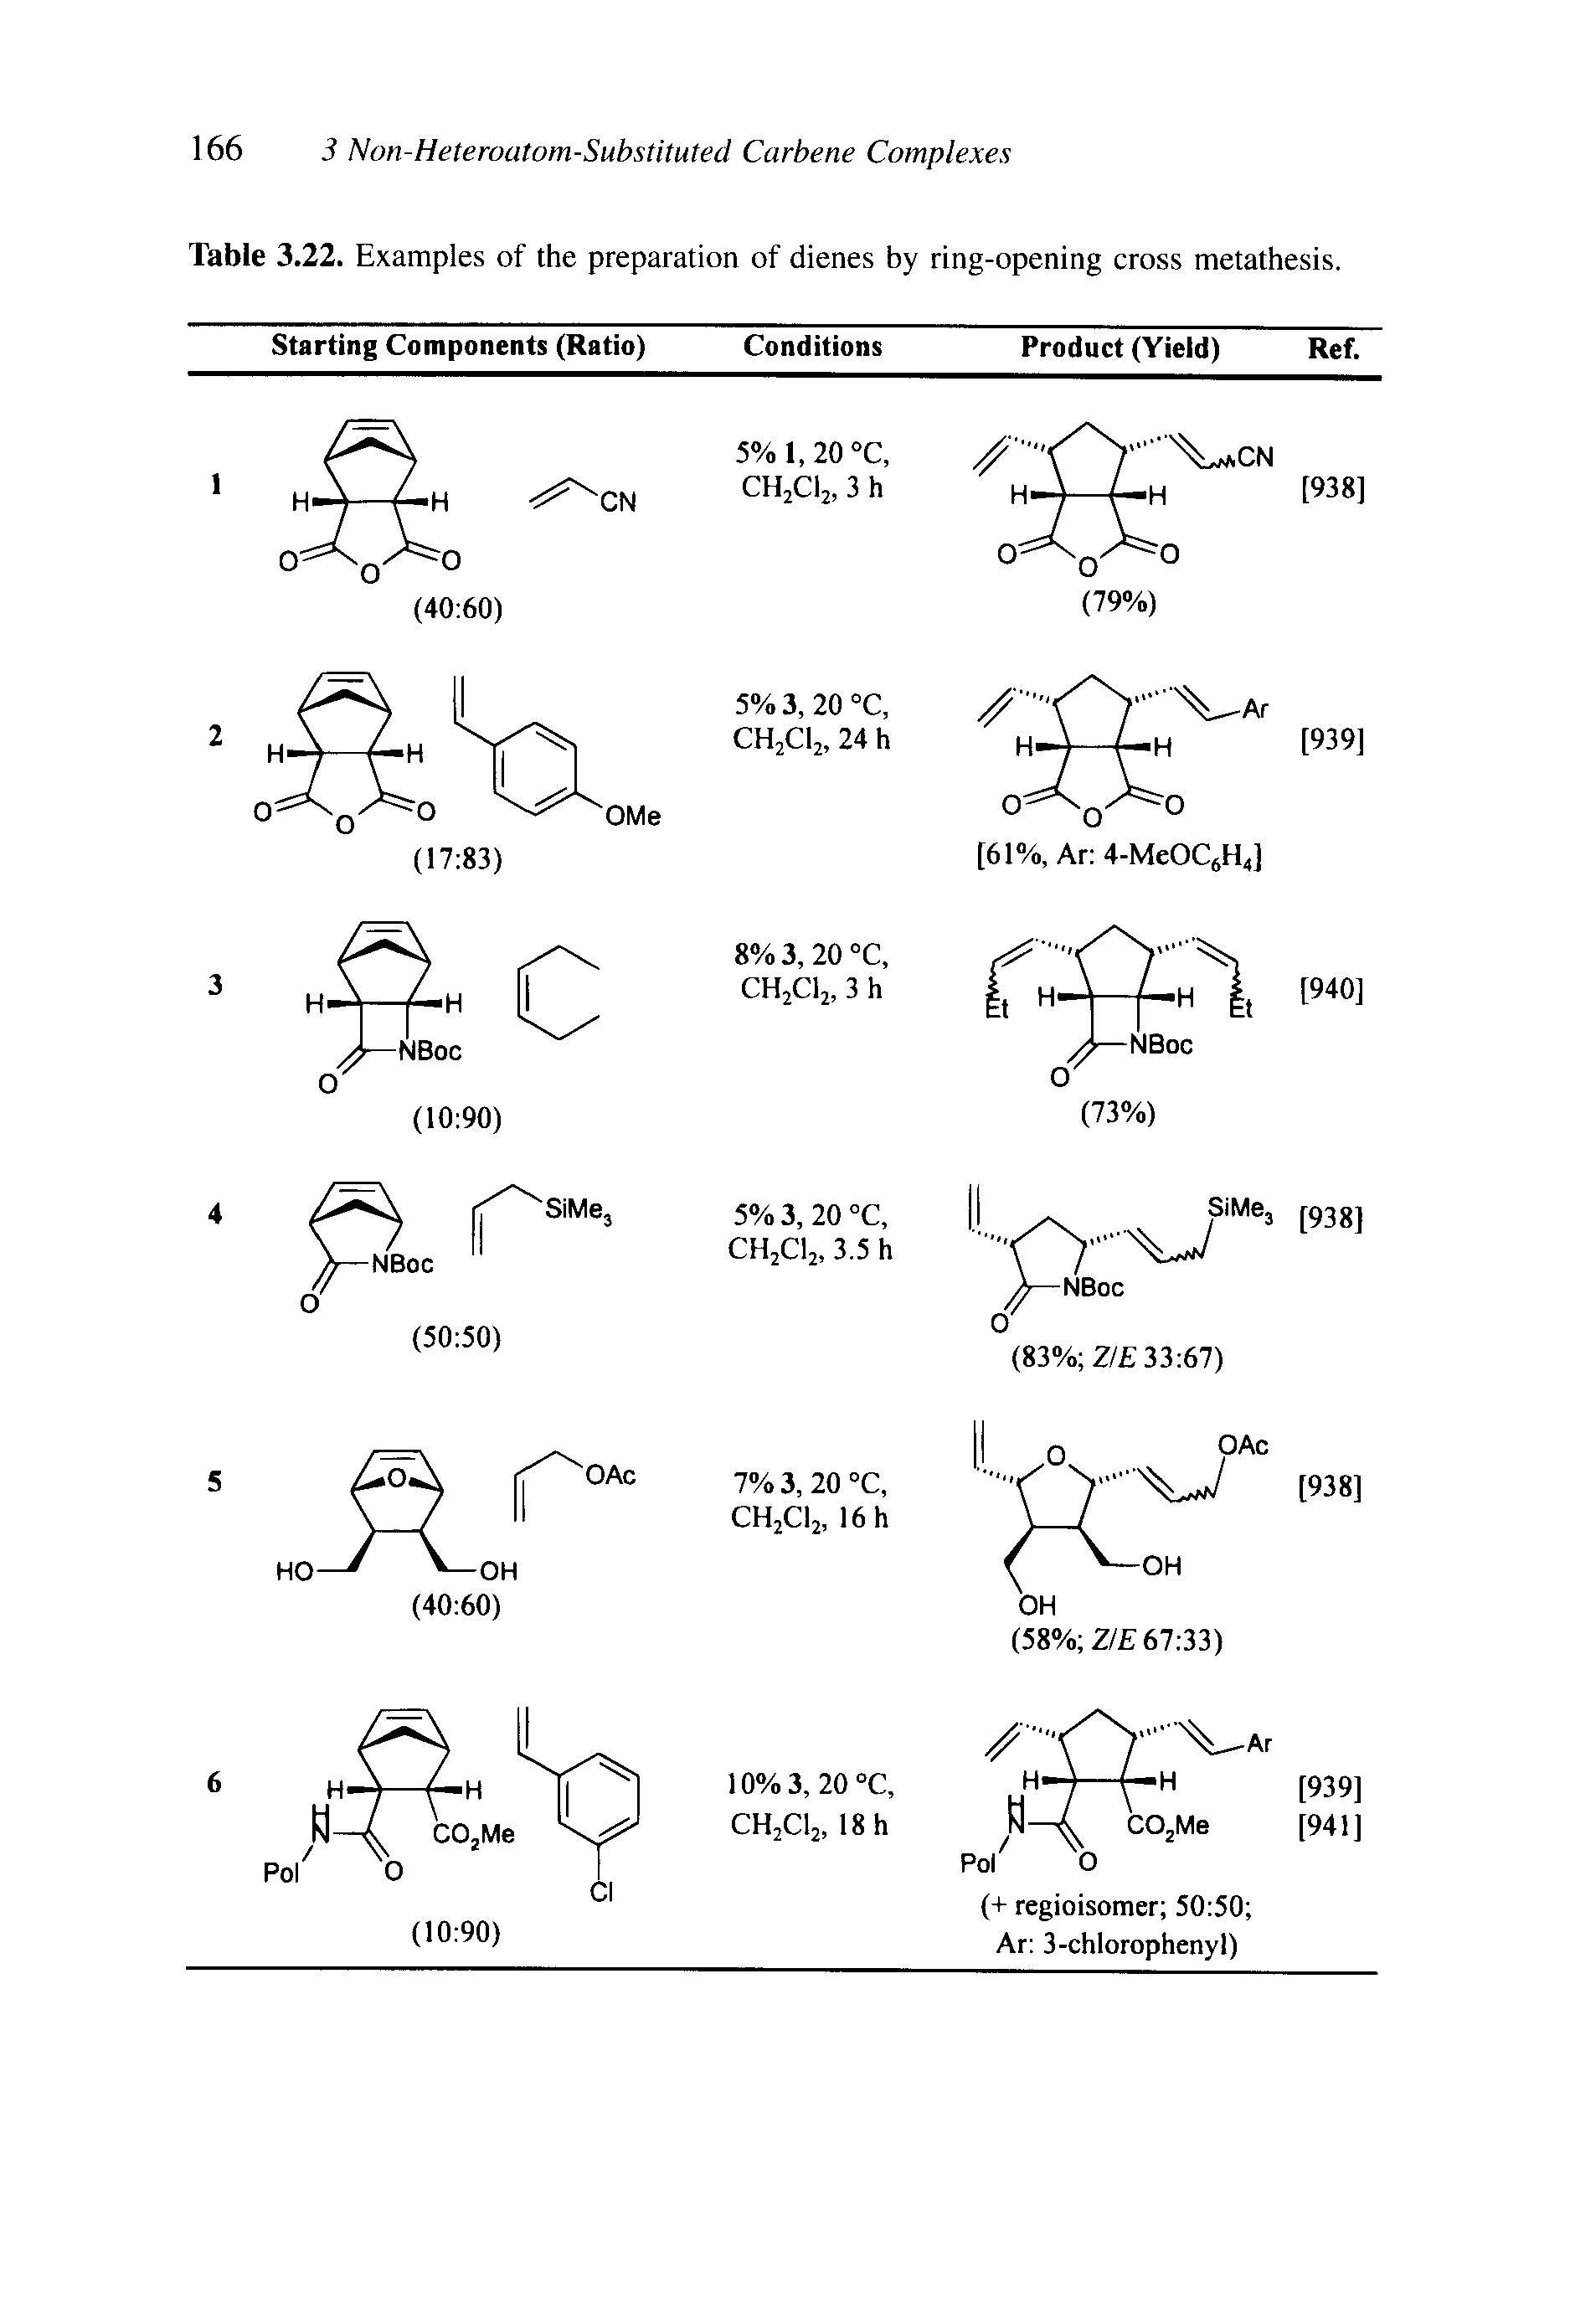 Table 3.22. Examples of the preparation of dienes by ring-opening cross metathesis.